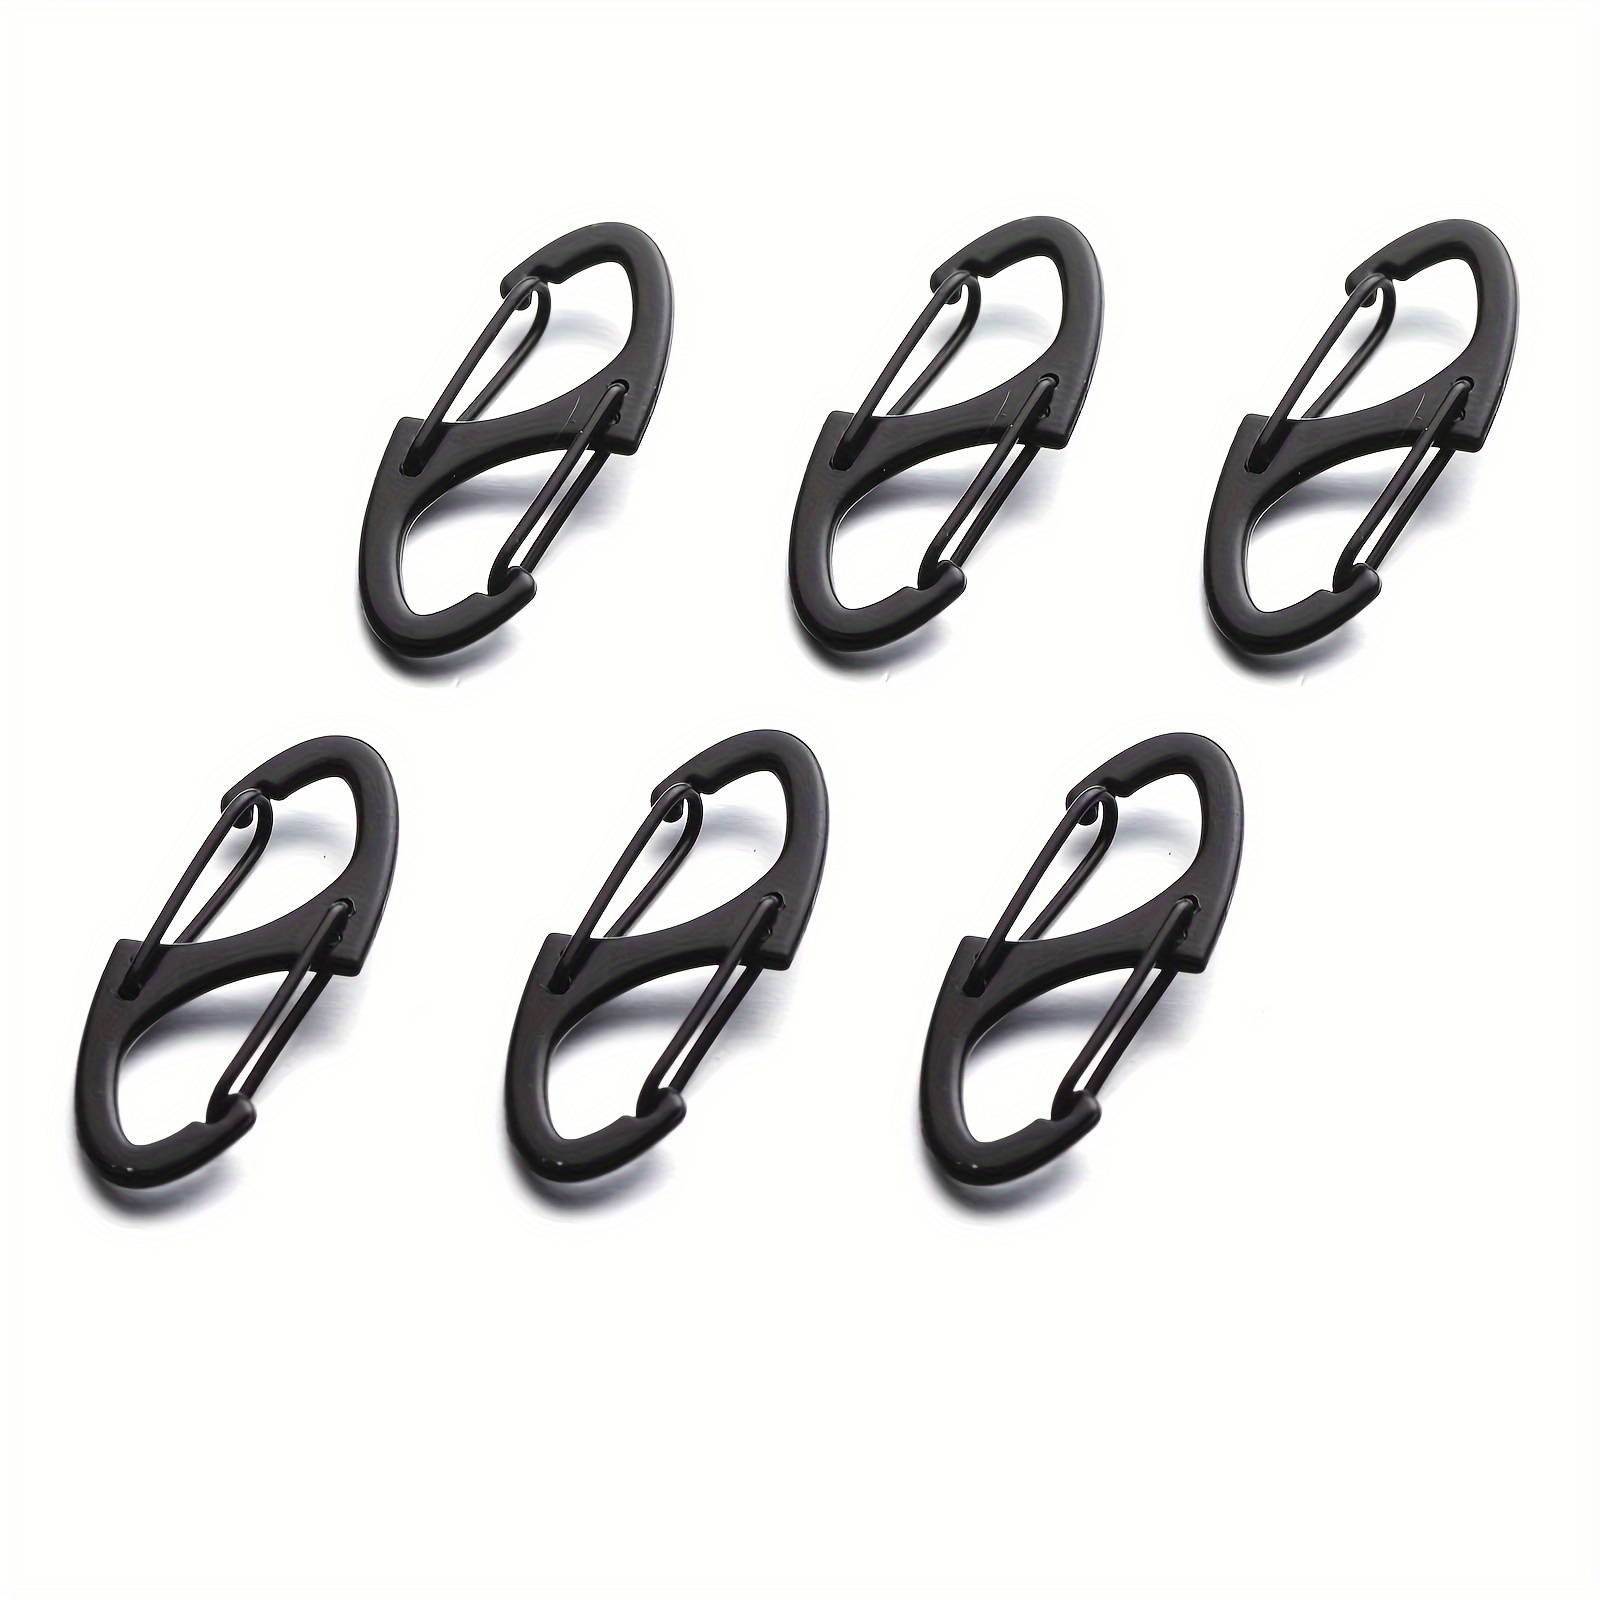 Zipper Clips Anti Theft, 20 Pcs Zipper Pull Locks for Backpacks, Dual Spring S Carabiner Zipper Clip Theft Deterrent for Luggage Suitcase Camping